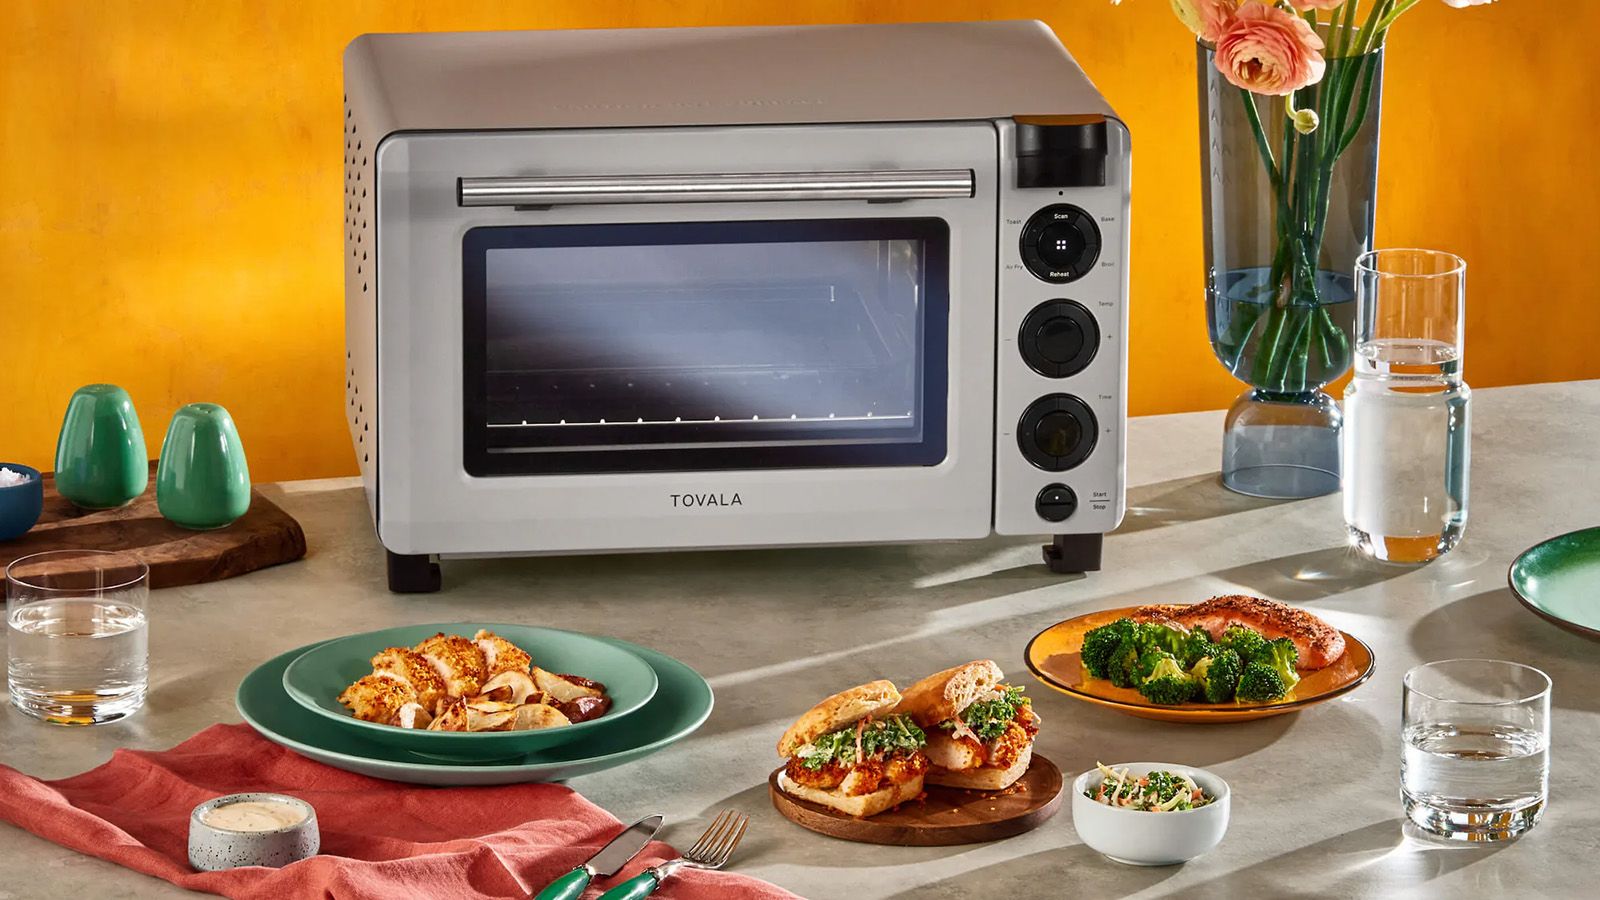 Tovala Smart Oven, 5-in-1 Air Fryer Oven Combo - Air Fry, Toast, Bake,  Broil, and Reheat - Smartphone Controlled Countertop Convection and Toaster  Oven - With Tovala Meal Credit ($50 Value) - WiFi - Yahoo Shopping